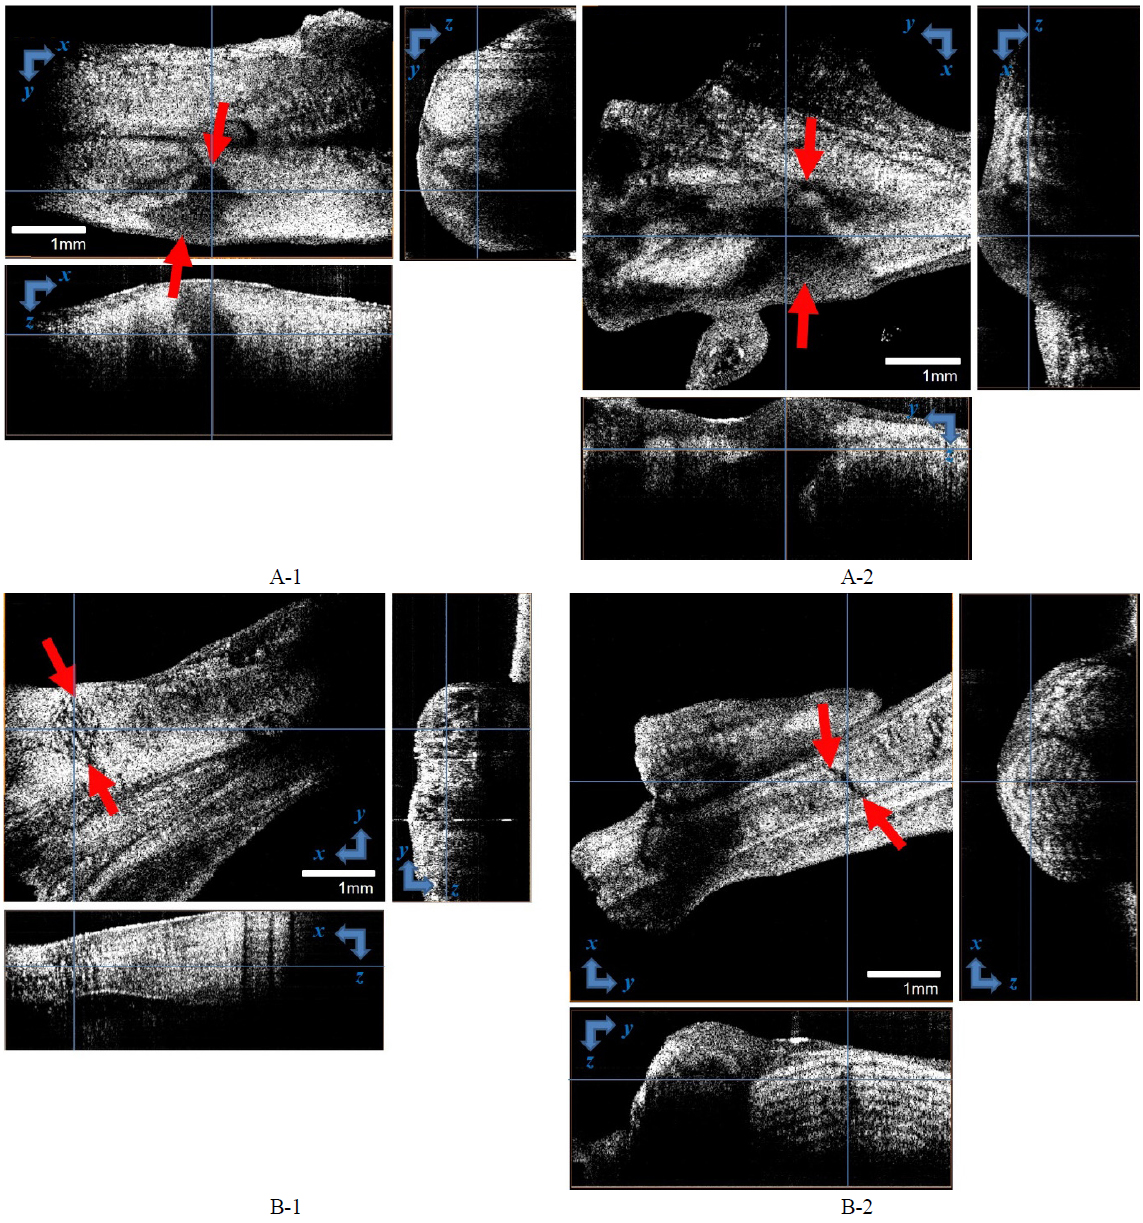 Threedimensional OCT findings for tendons of non-denervated and denervated rats. En face images (xy plane) were reconstructed from volume-rendered images. The red arrows correspond to the white arrows in Fig. 2A-1: Non-denervated rat after the first week. A-2: Non-denervated rat after the second week. B-1: Denervated rat after the first week. B-2: Denervated rat after the second week. Scale bar: 1 mm.